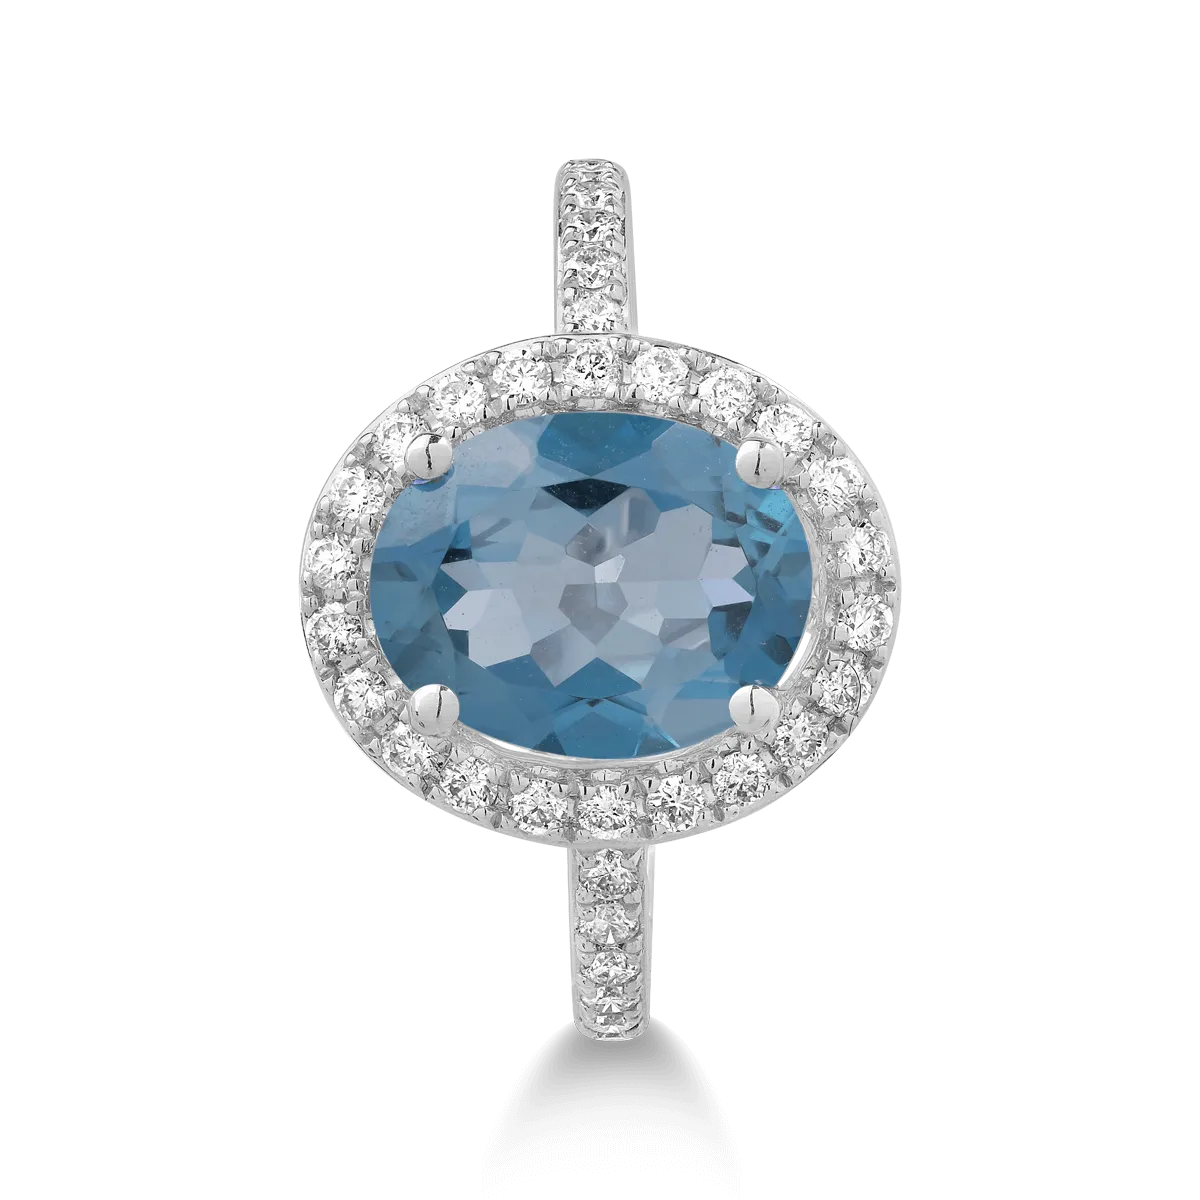 18K white gold ring with 2.25ct London blue topaz and 0.26ct diamonds